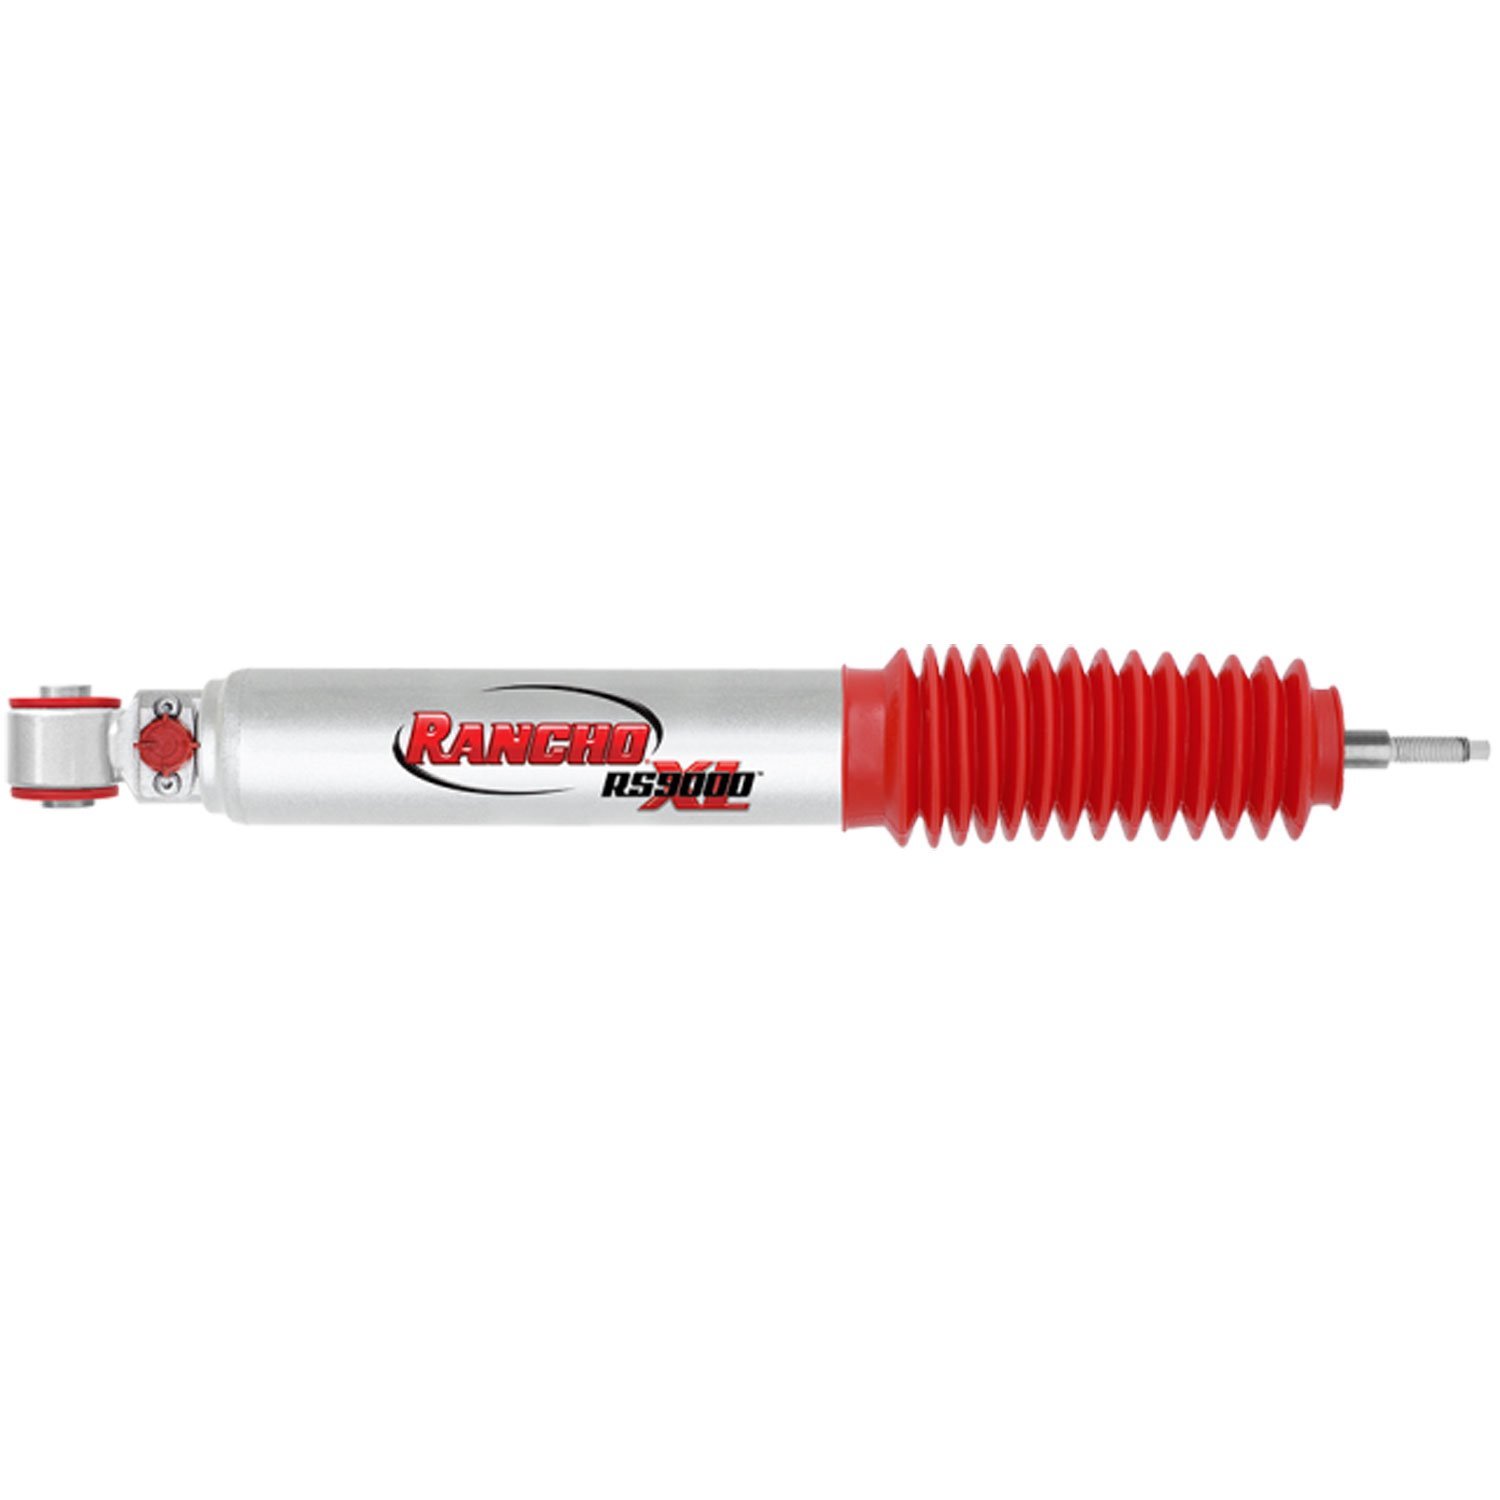 RS9000XL Front Shock Absorber Fits Isuzu Amigo, Pickup, Rodeo, Trooper and VehiCROSS